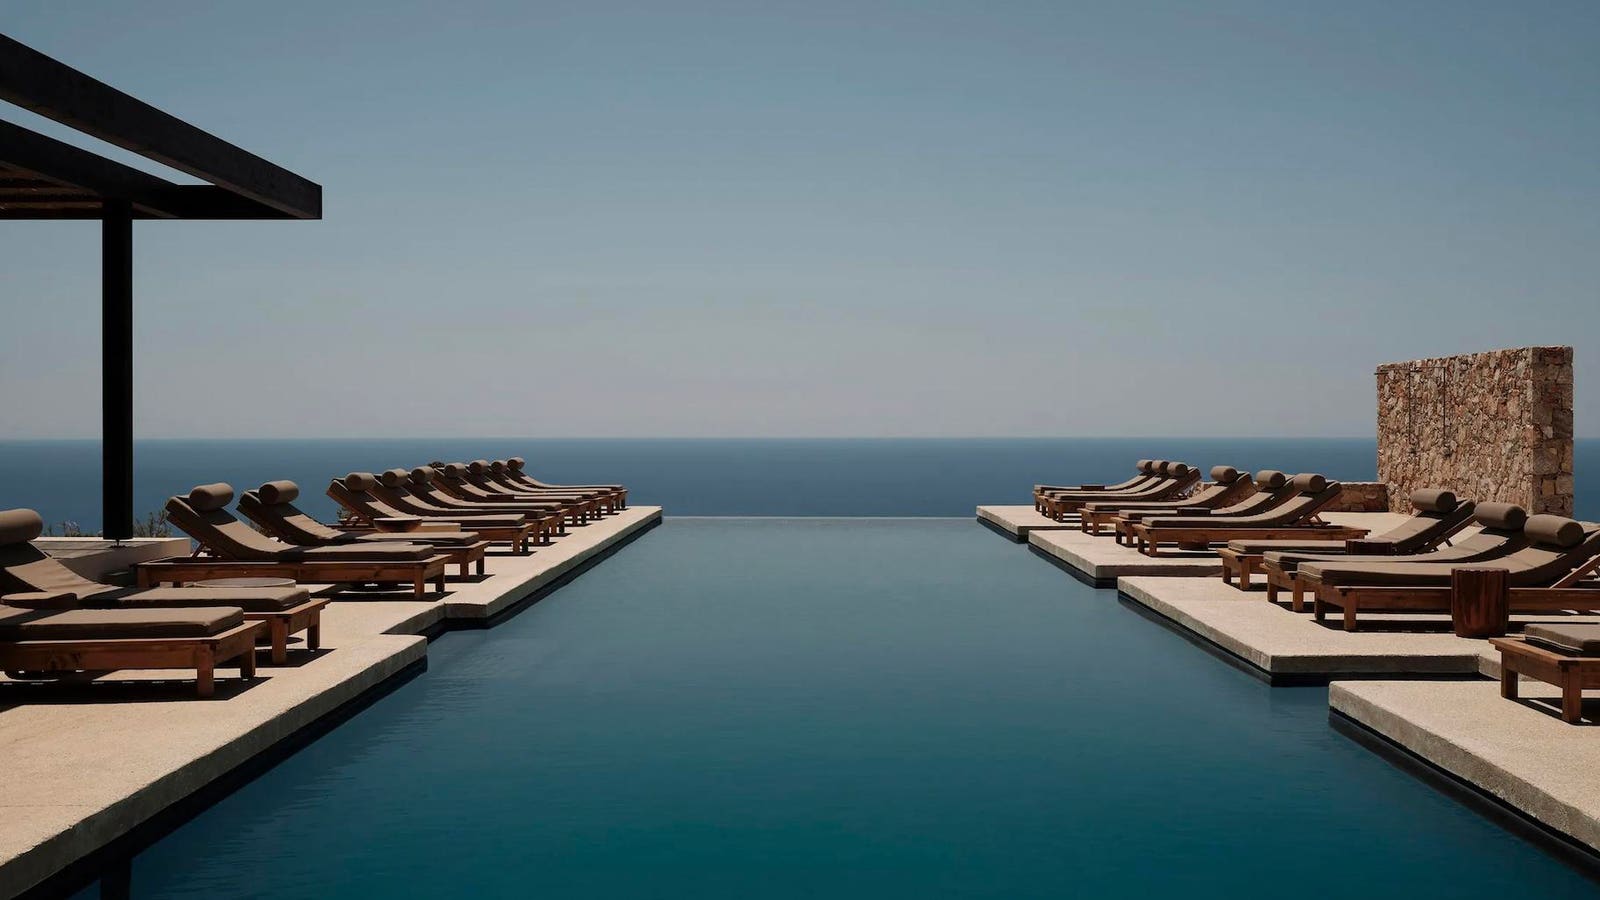 A Curated Guide To Greece’s Top Art & Design Hotels